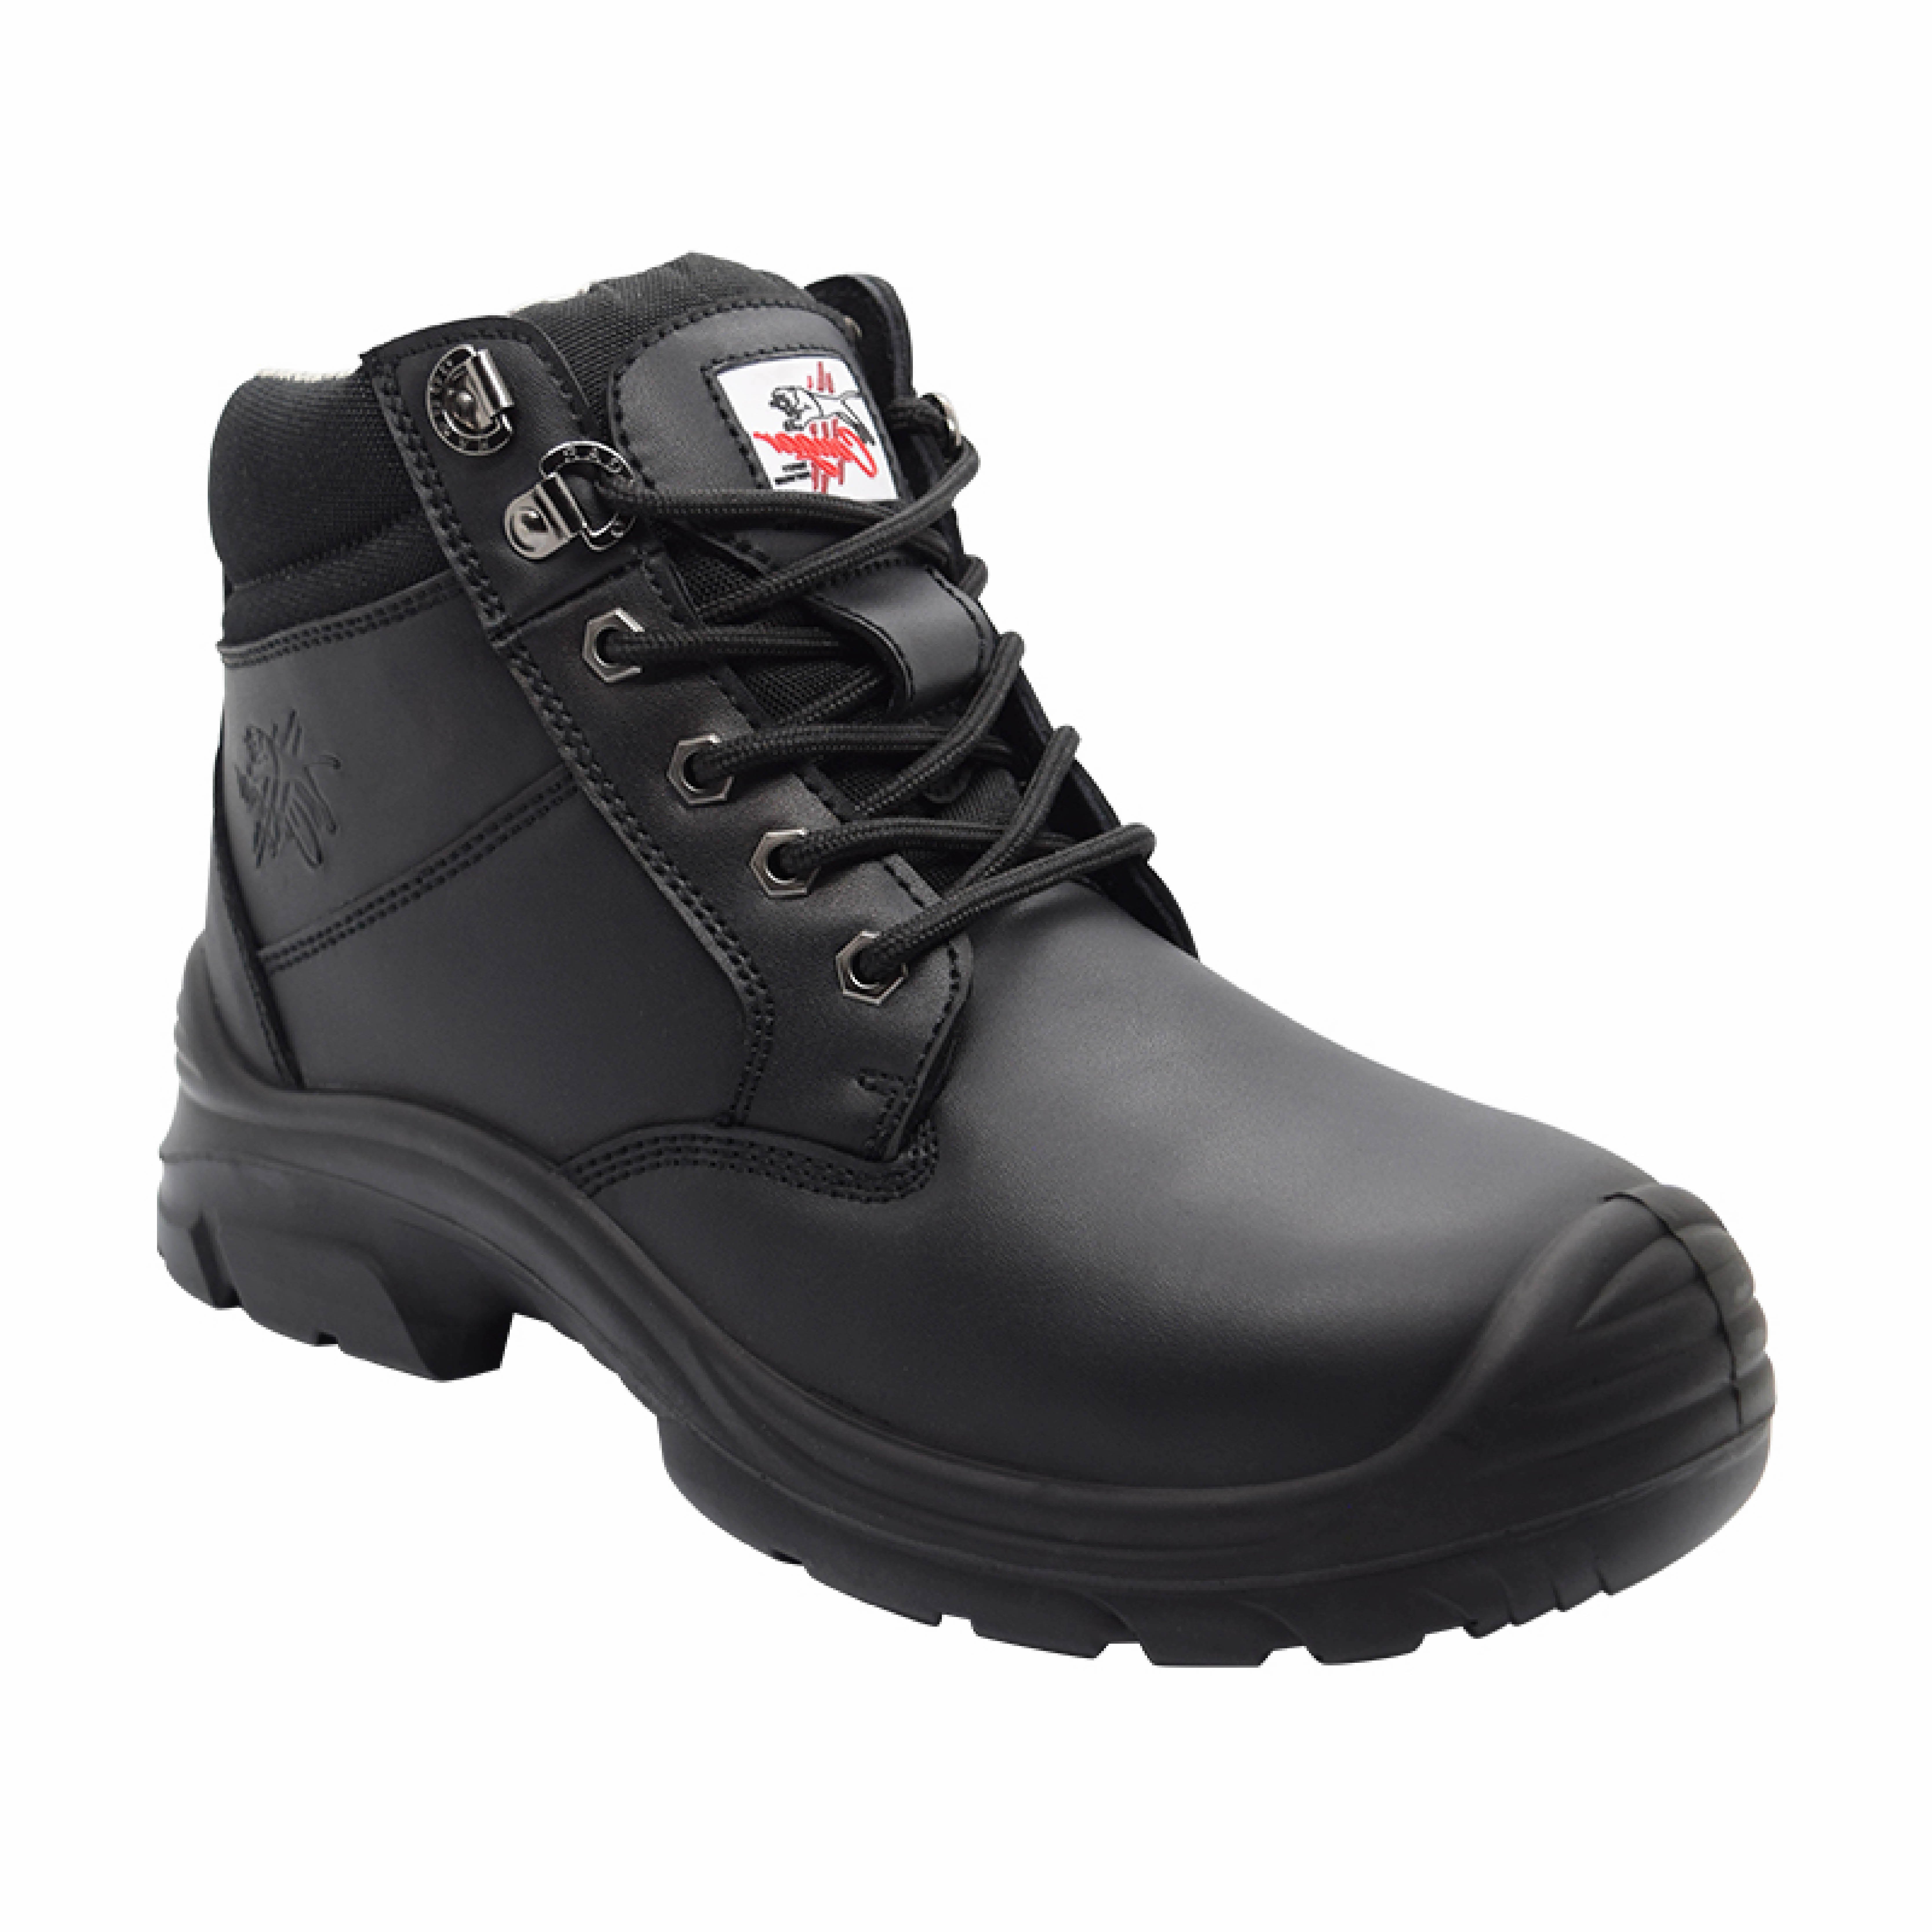 Lace Up Safety Boots with Safety Toe Black Size 11 (1 pair)